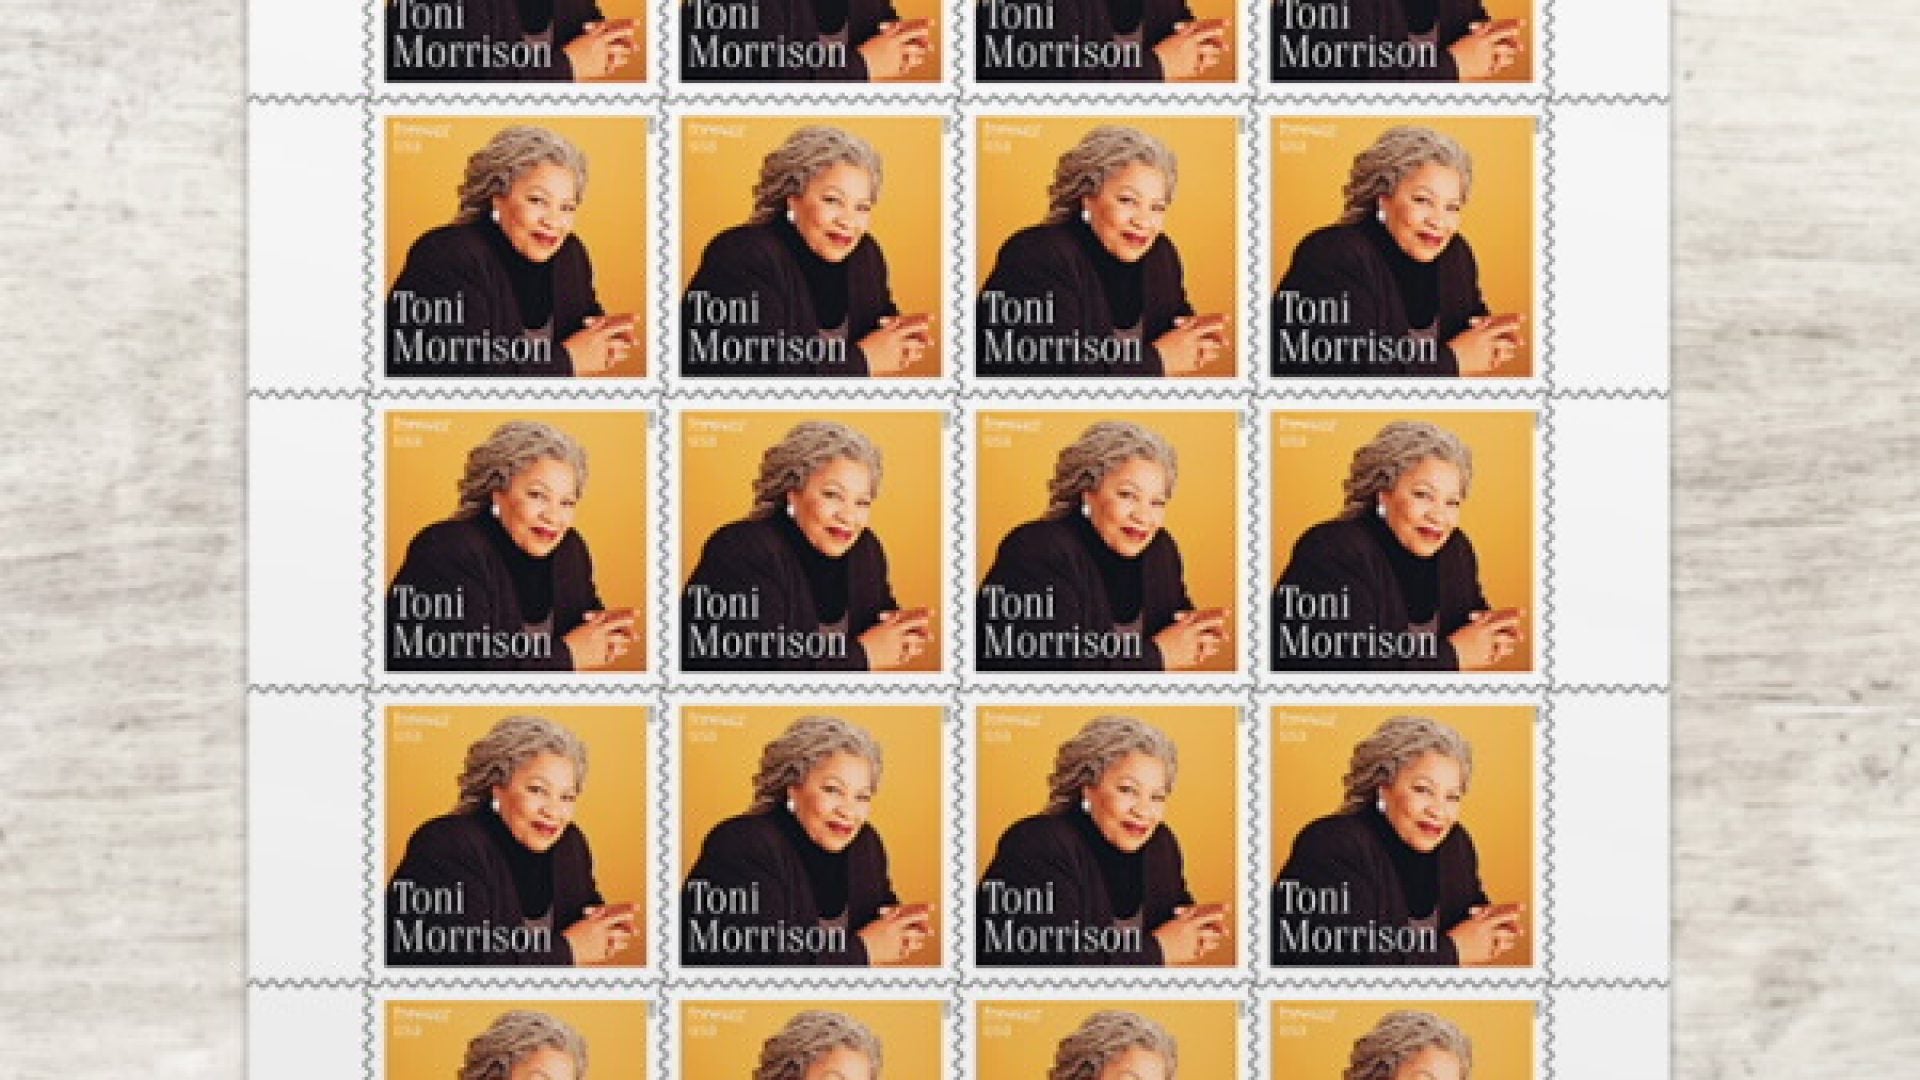 Toni Morrison Honored With New USPS "Forever" Stamp